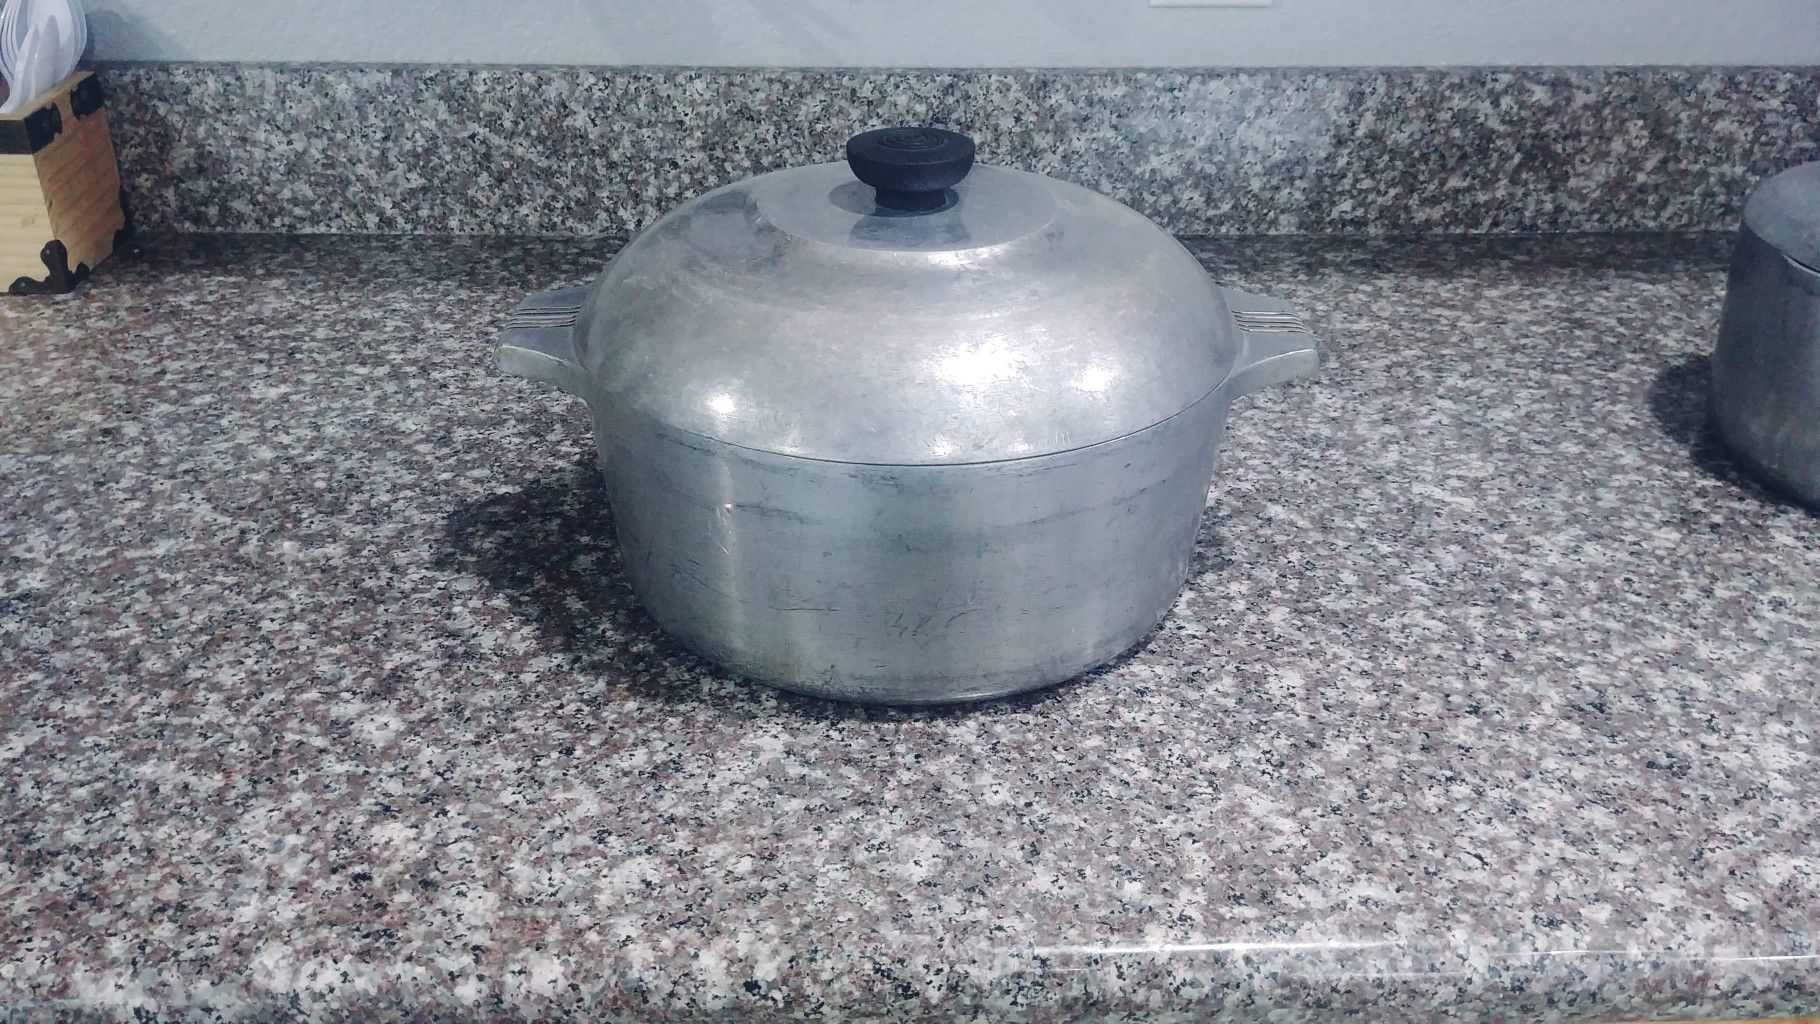 Magnalite Cookware for Sale in Beaumont, TX - OfferUp